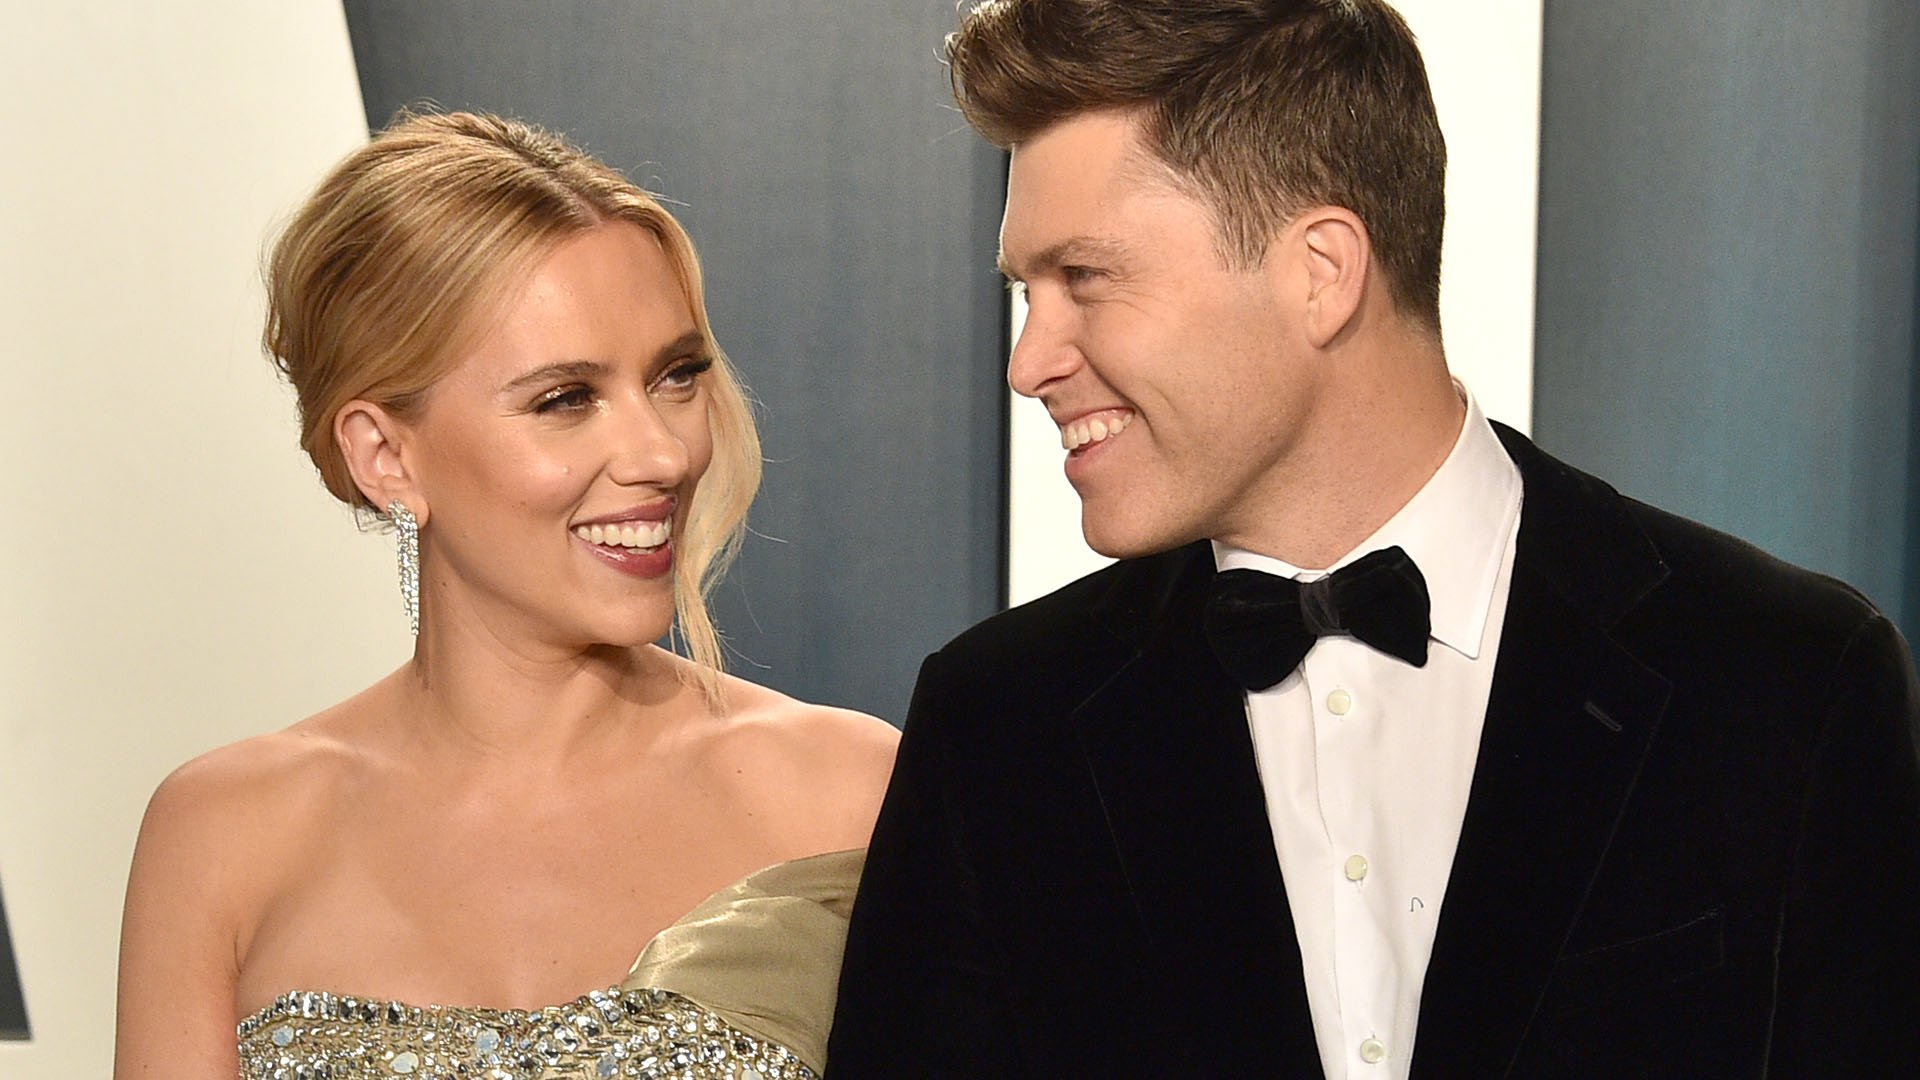 When Will Scarlett Johansson And Colin Jost Get Married The Couple Rethinks Wedding Plans [ 1080 x 1920 Pixel ]